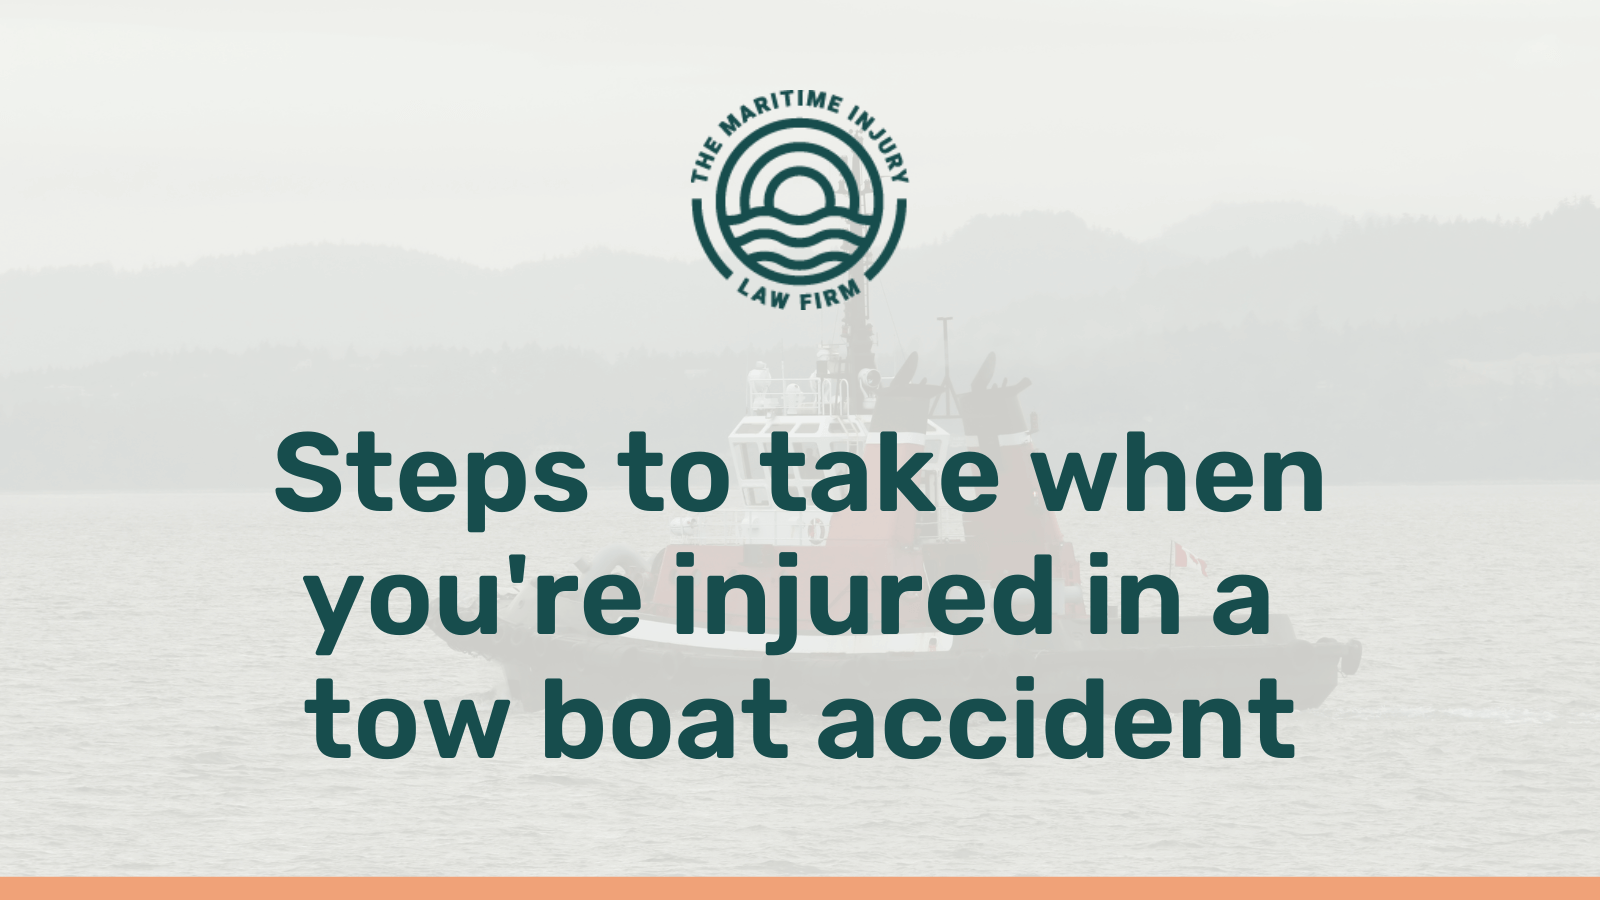 Steps to take when you're injured in a tow boat accident - maritime injury law firm - George Vourvoulias